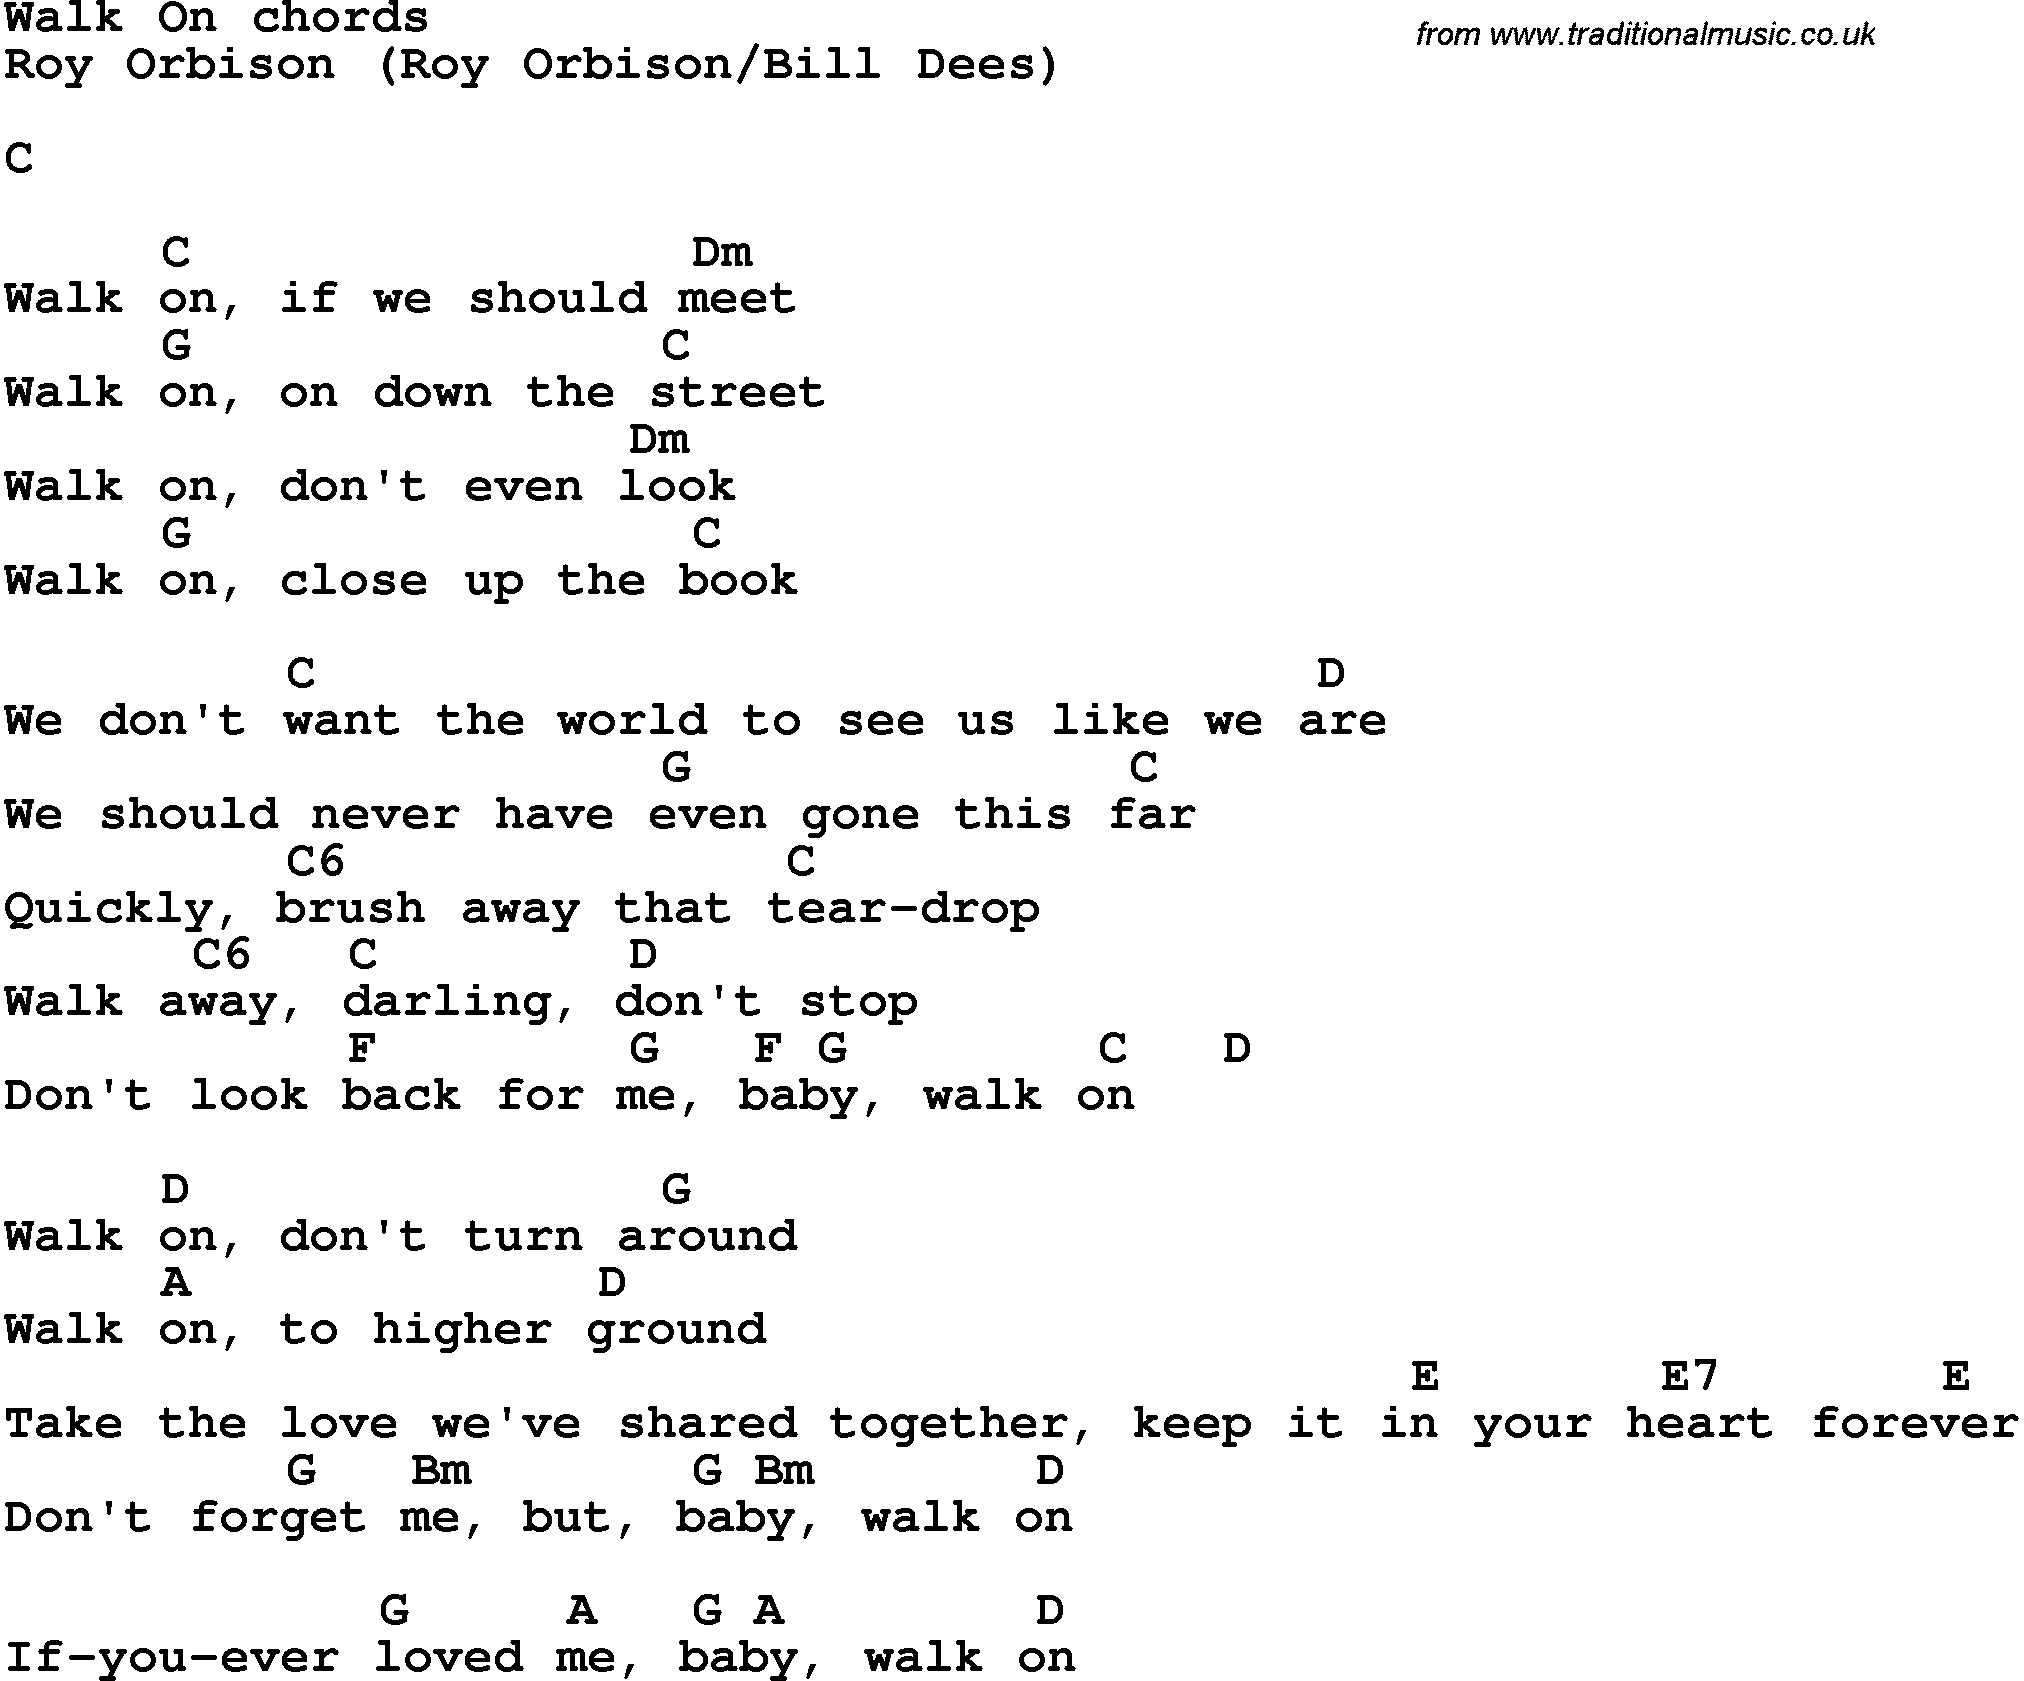 Song Lyrics with guitar chords for Walk On